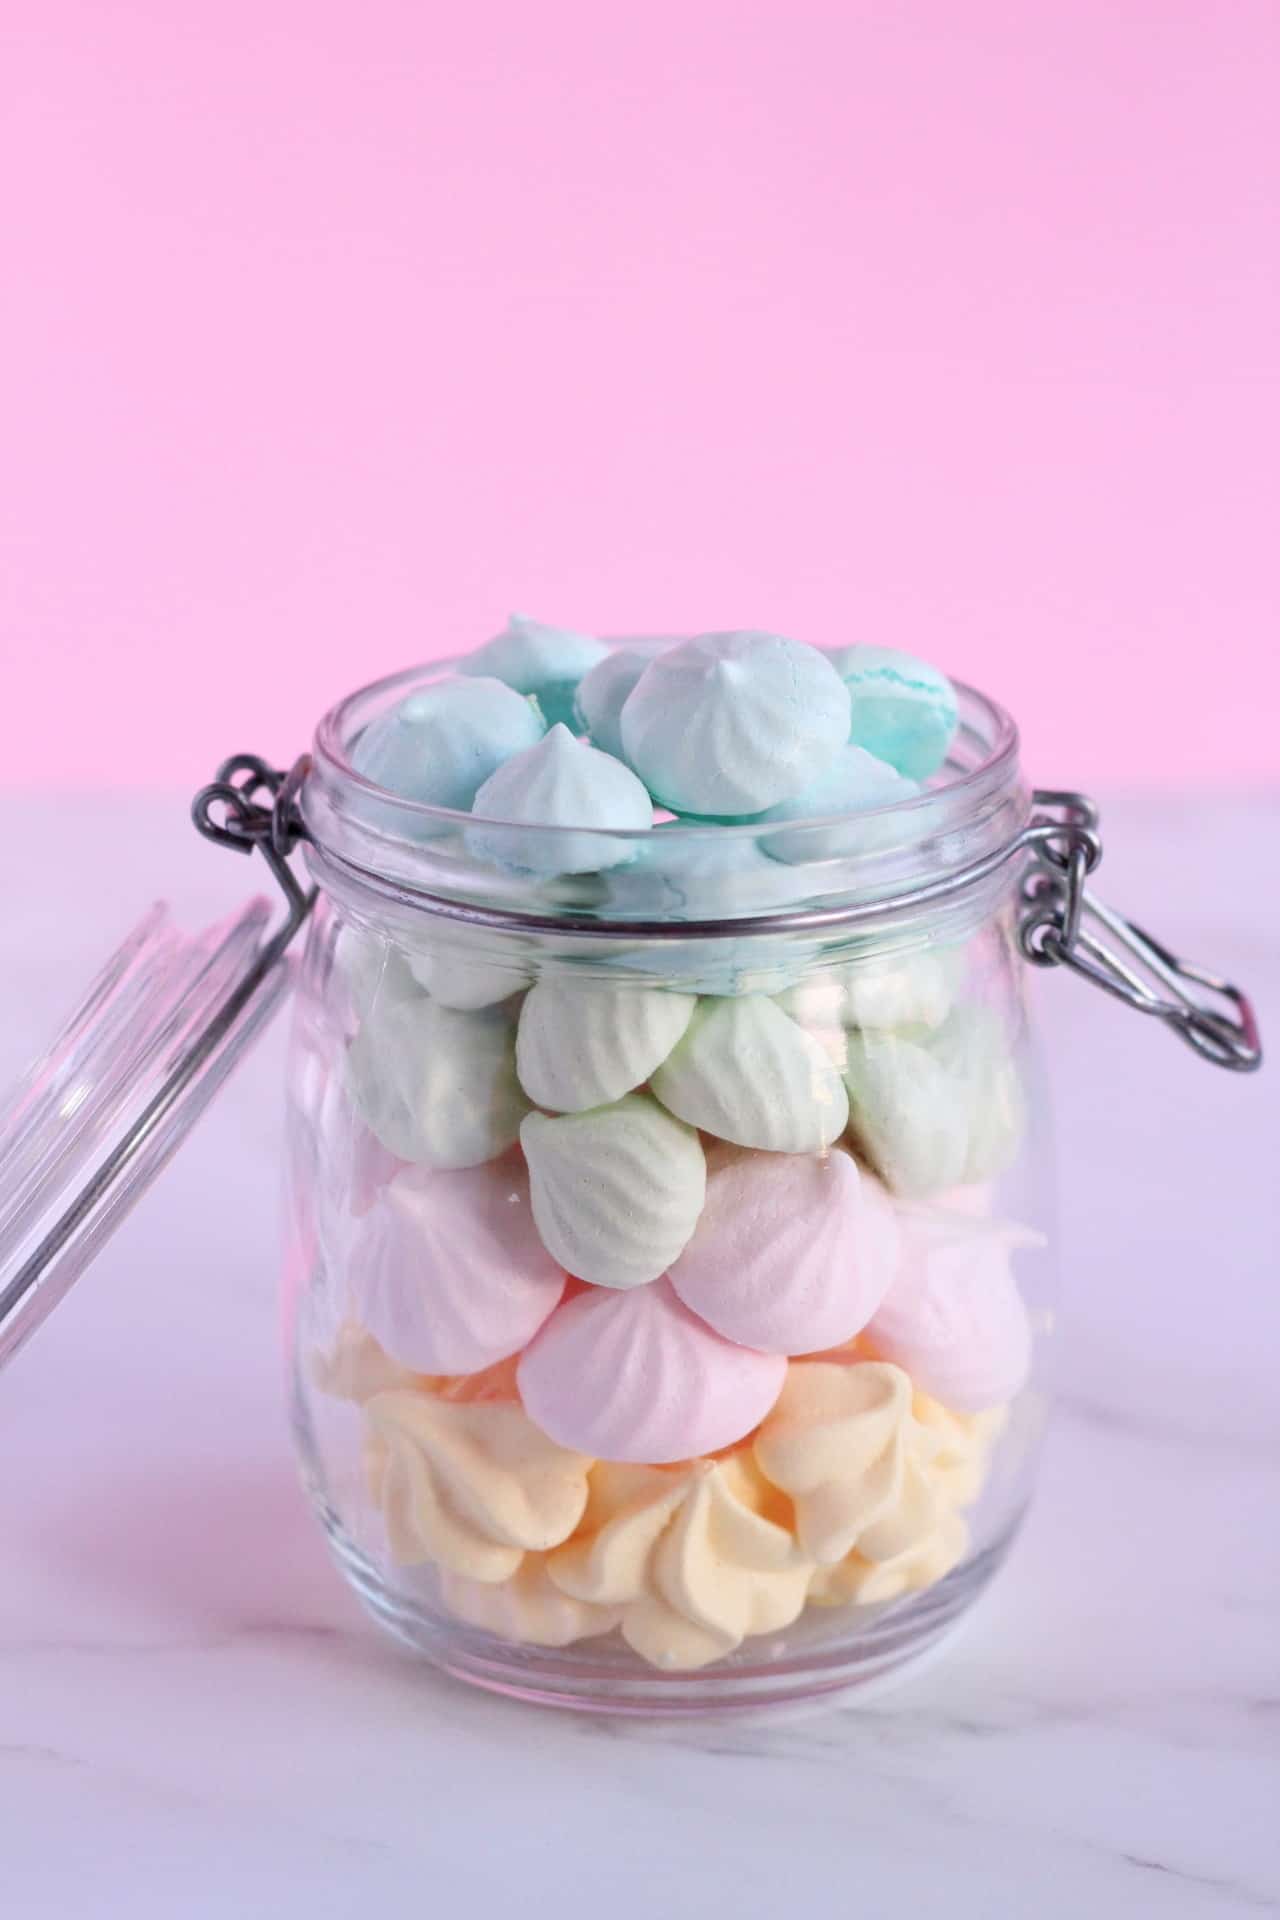 mini meringues in blue, gree, pink and yellow partel colors in jar